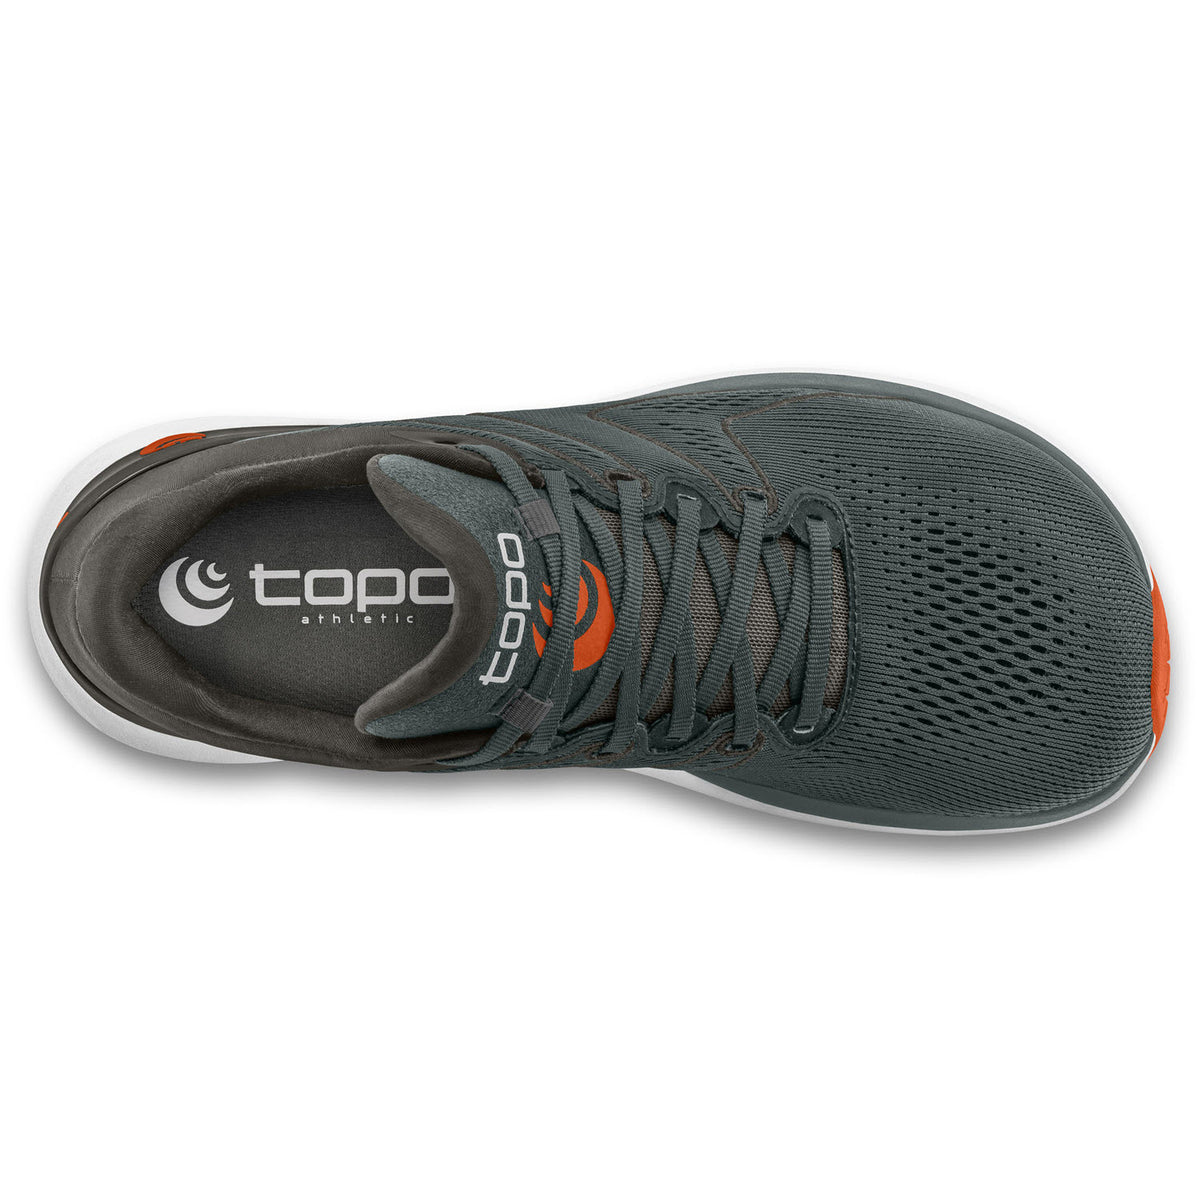 Top-down view of a single TOPO PHANTOM 2 grey/clay athletic running shoe with orange accents and a wider toe-box, designed as a daily training option.